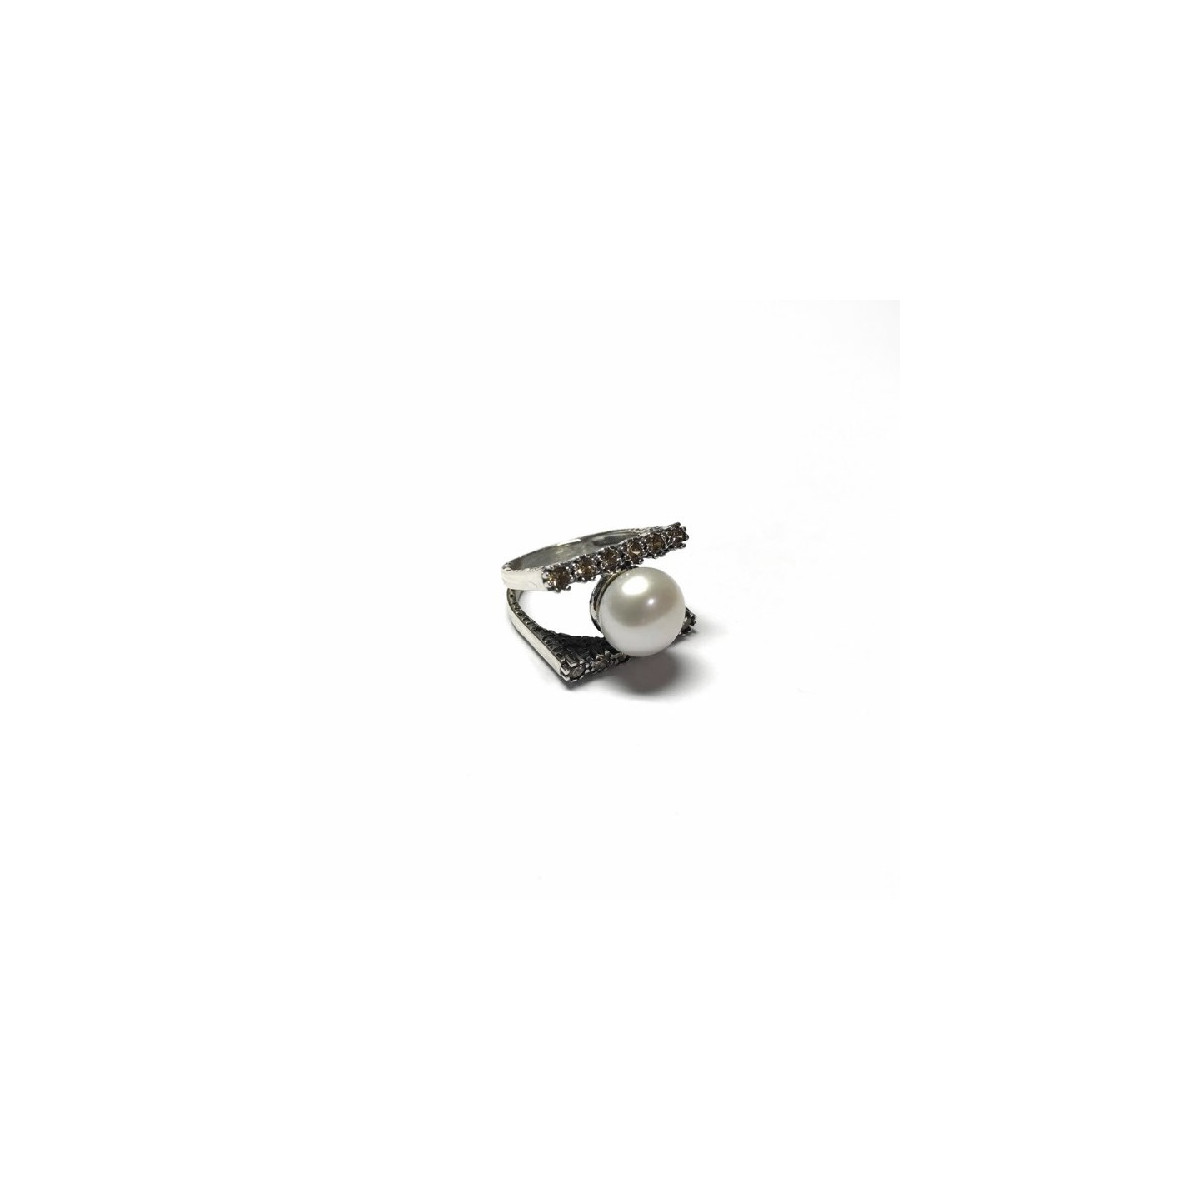 PEARL TOP SILVER RING - AN5803PC